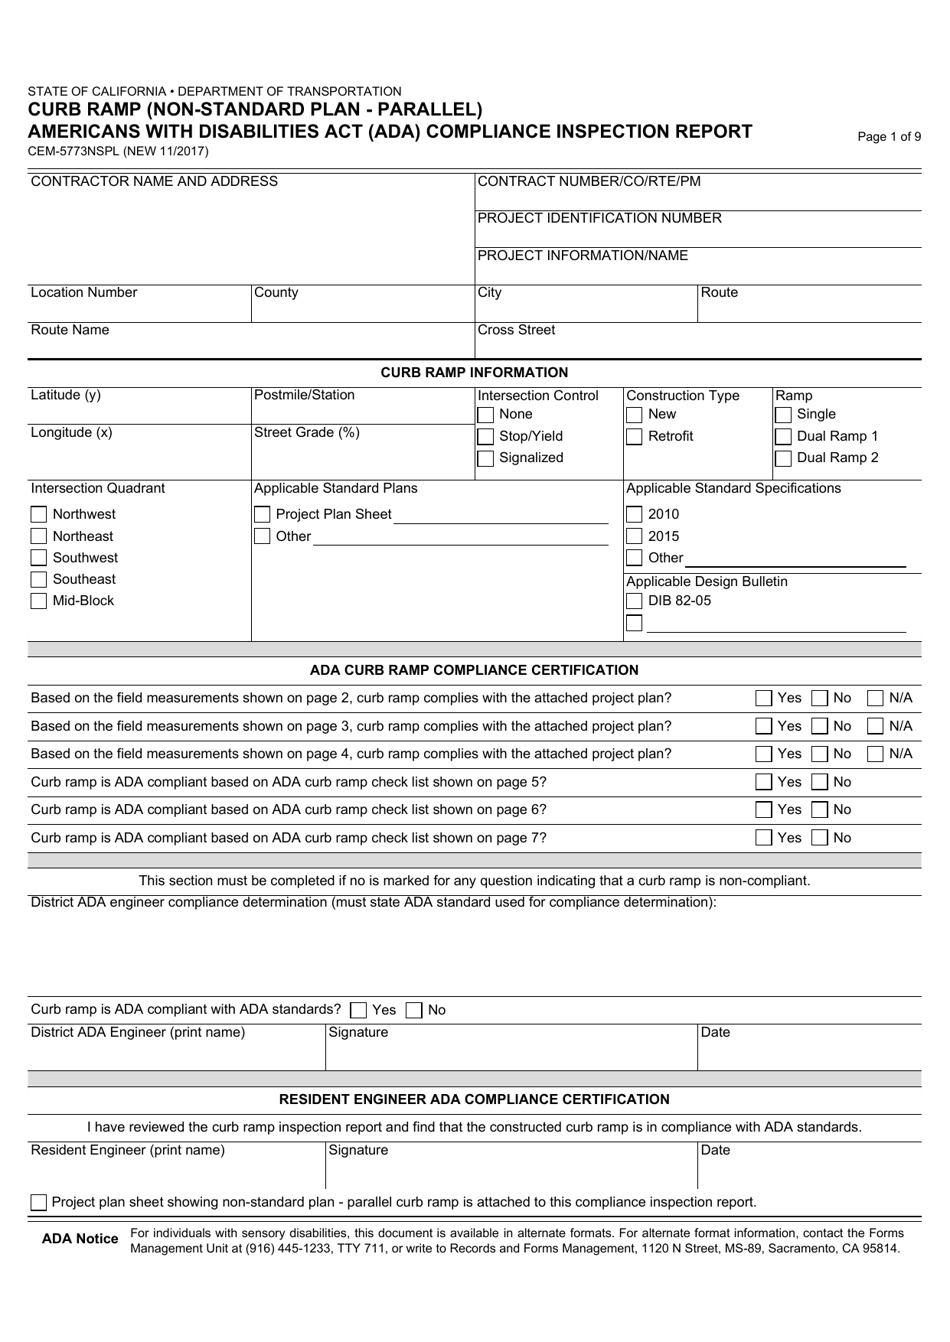 Form CEM-5773NSPL Curb Ramp (Non-standard Plan - Parallel) Americans With Disabilities Act (Ada) Compliance Inspection Report - California, Page 1